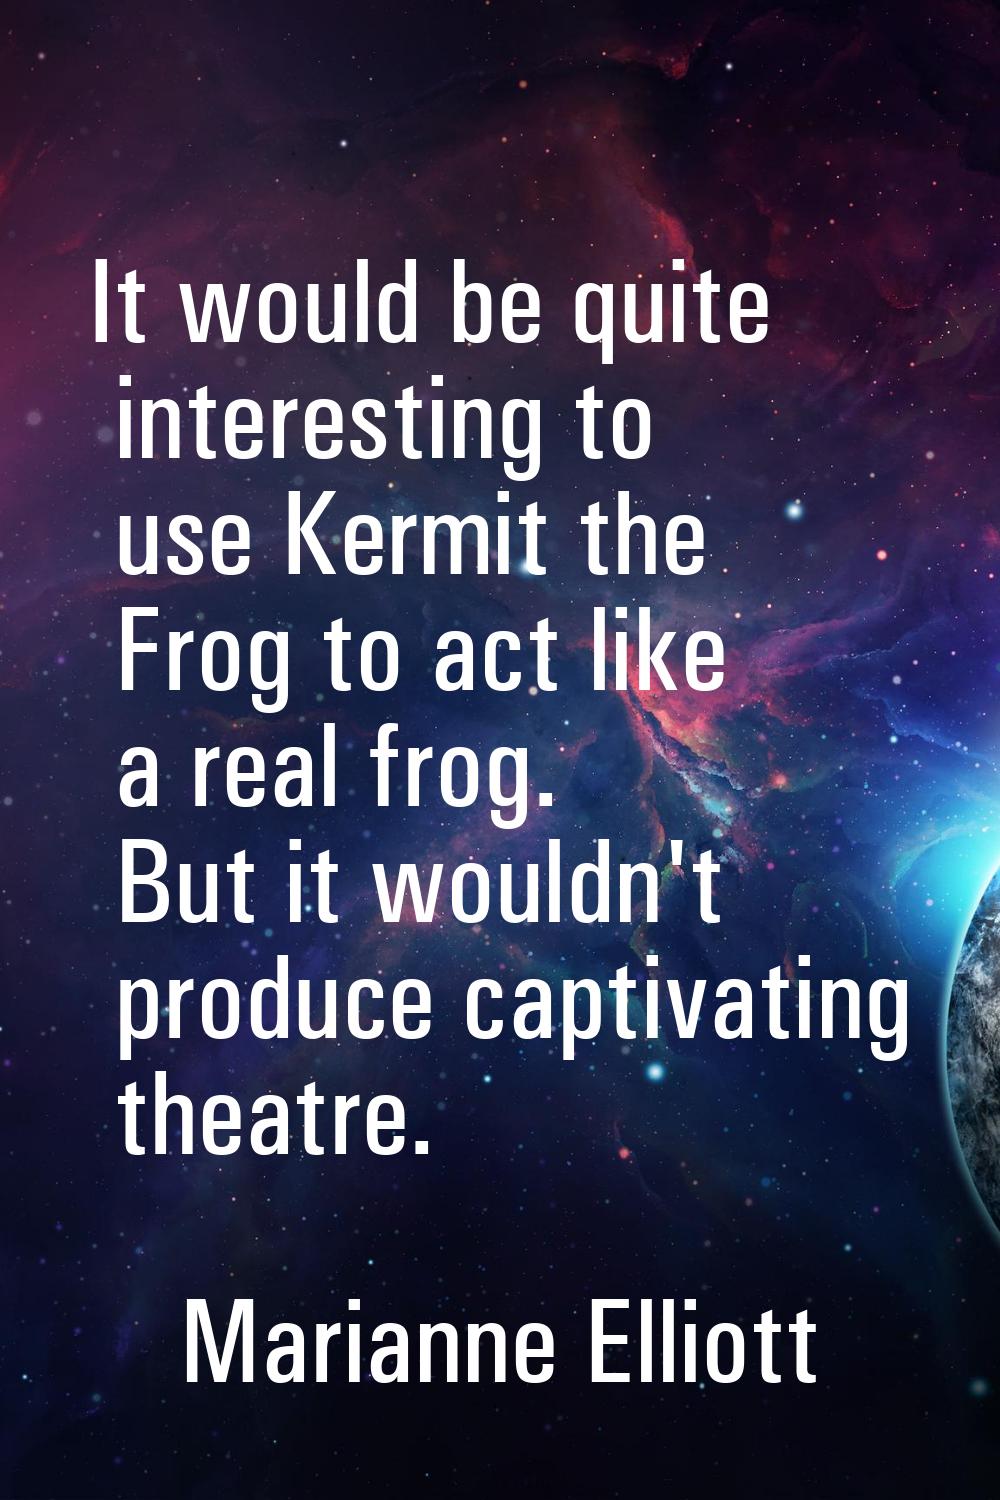 It would be quite interesting to use Kermit the Frog to act like a real frog. But it wouldn't produ